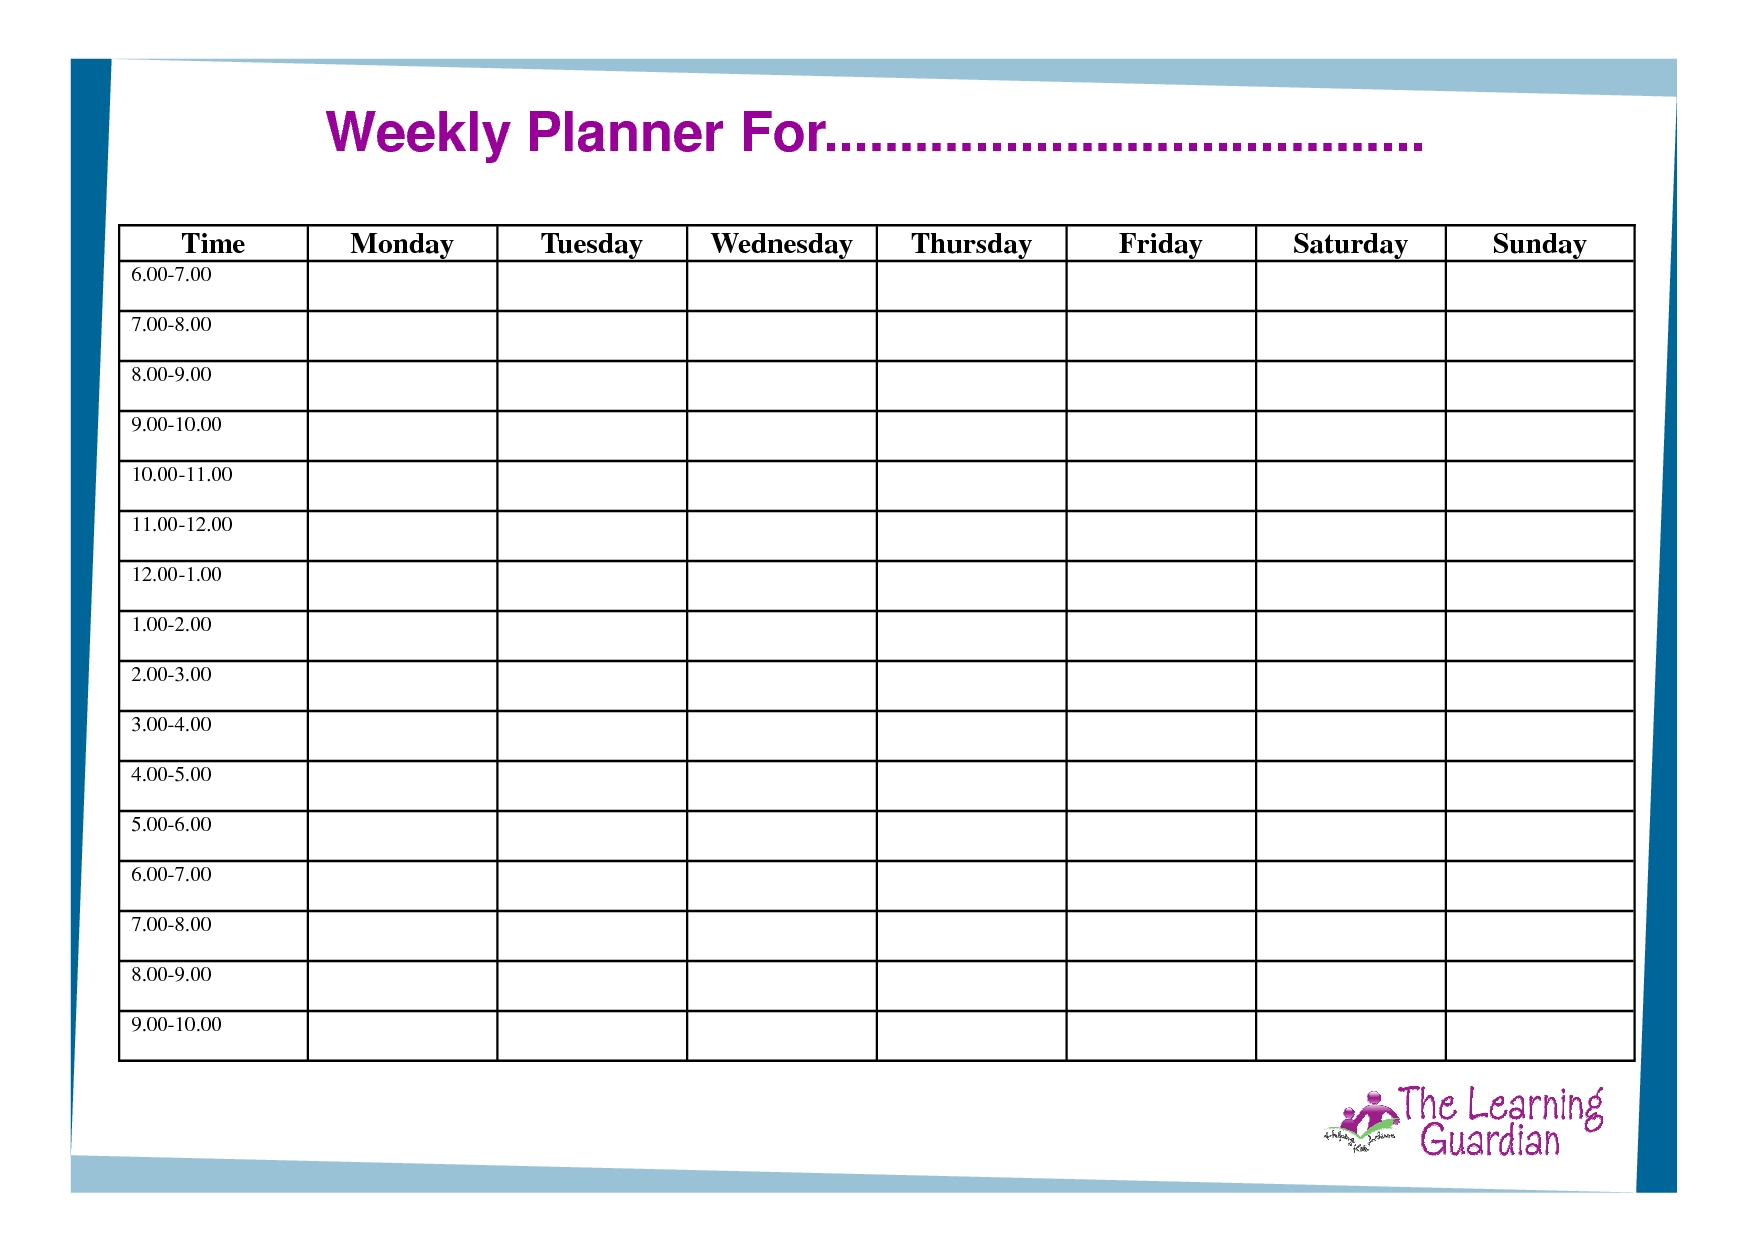 Free Printable Weekly Calendar Templates | Weekly Planner-Monday To Friday Calendar Template